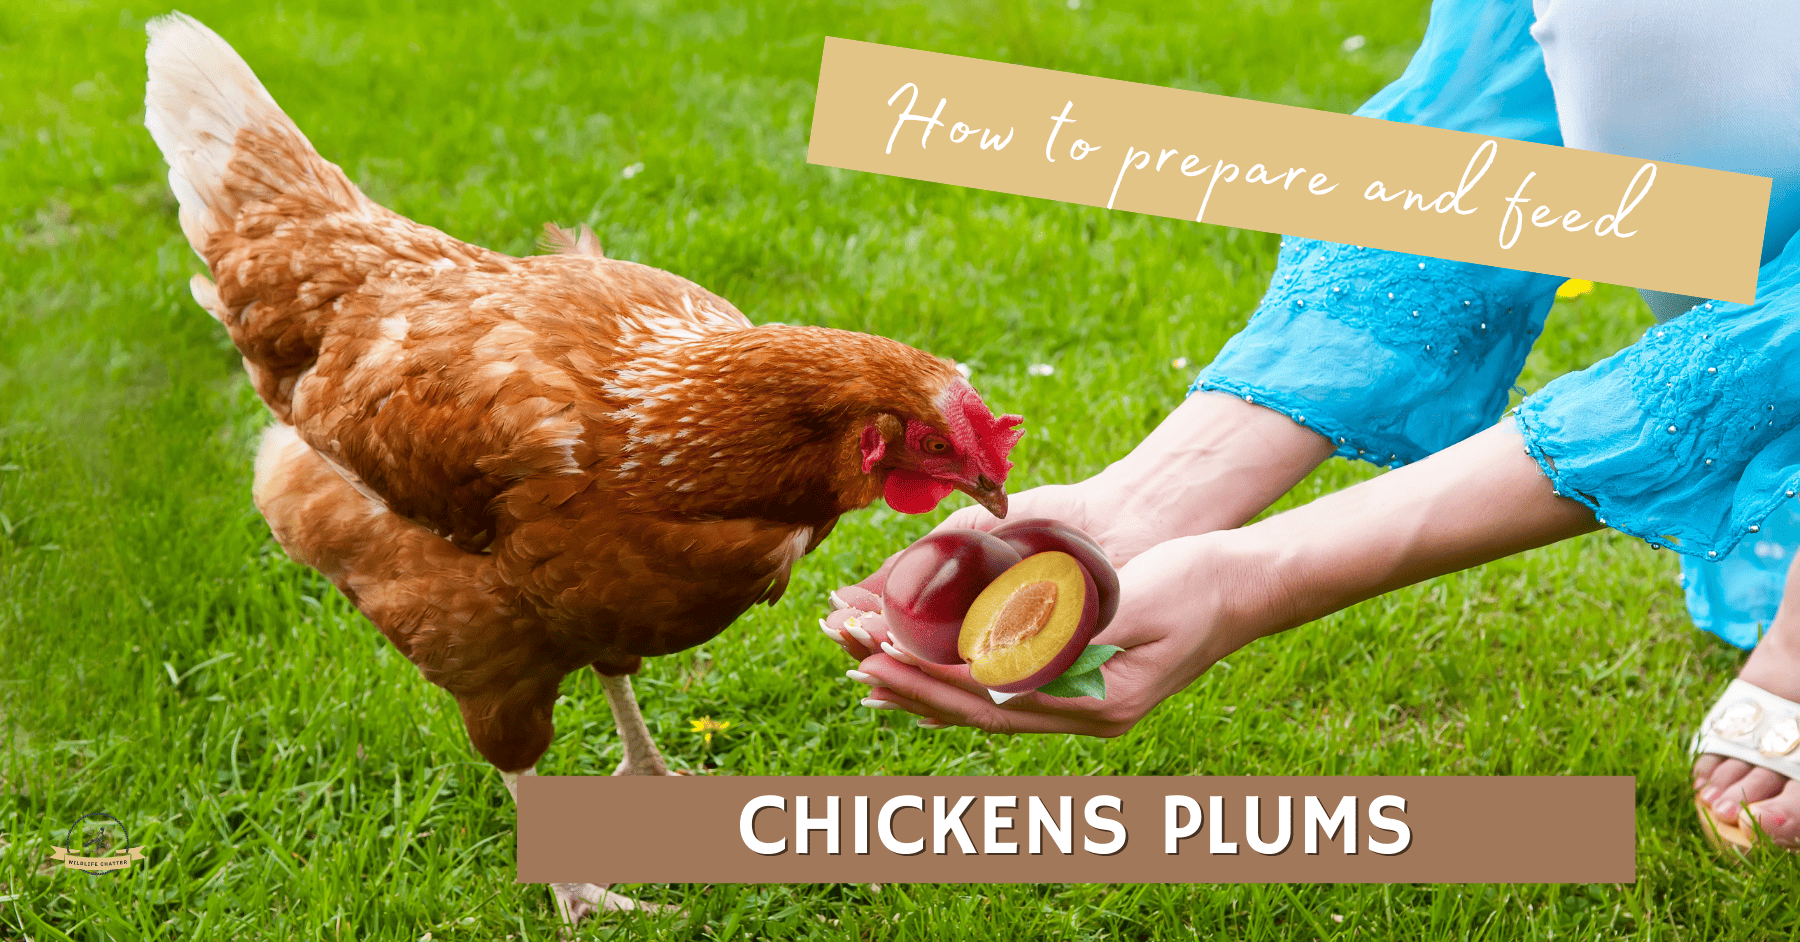 How to feed plums to chickens